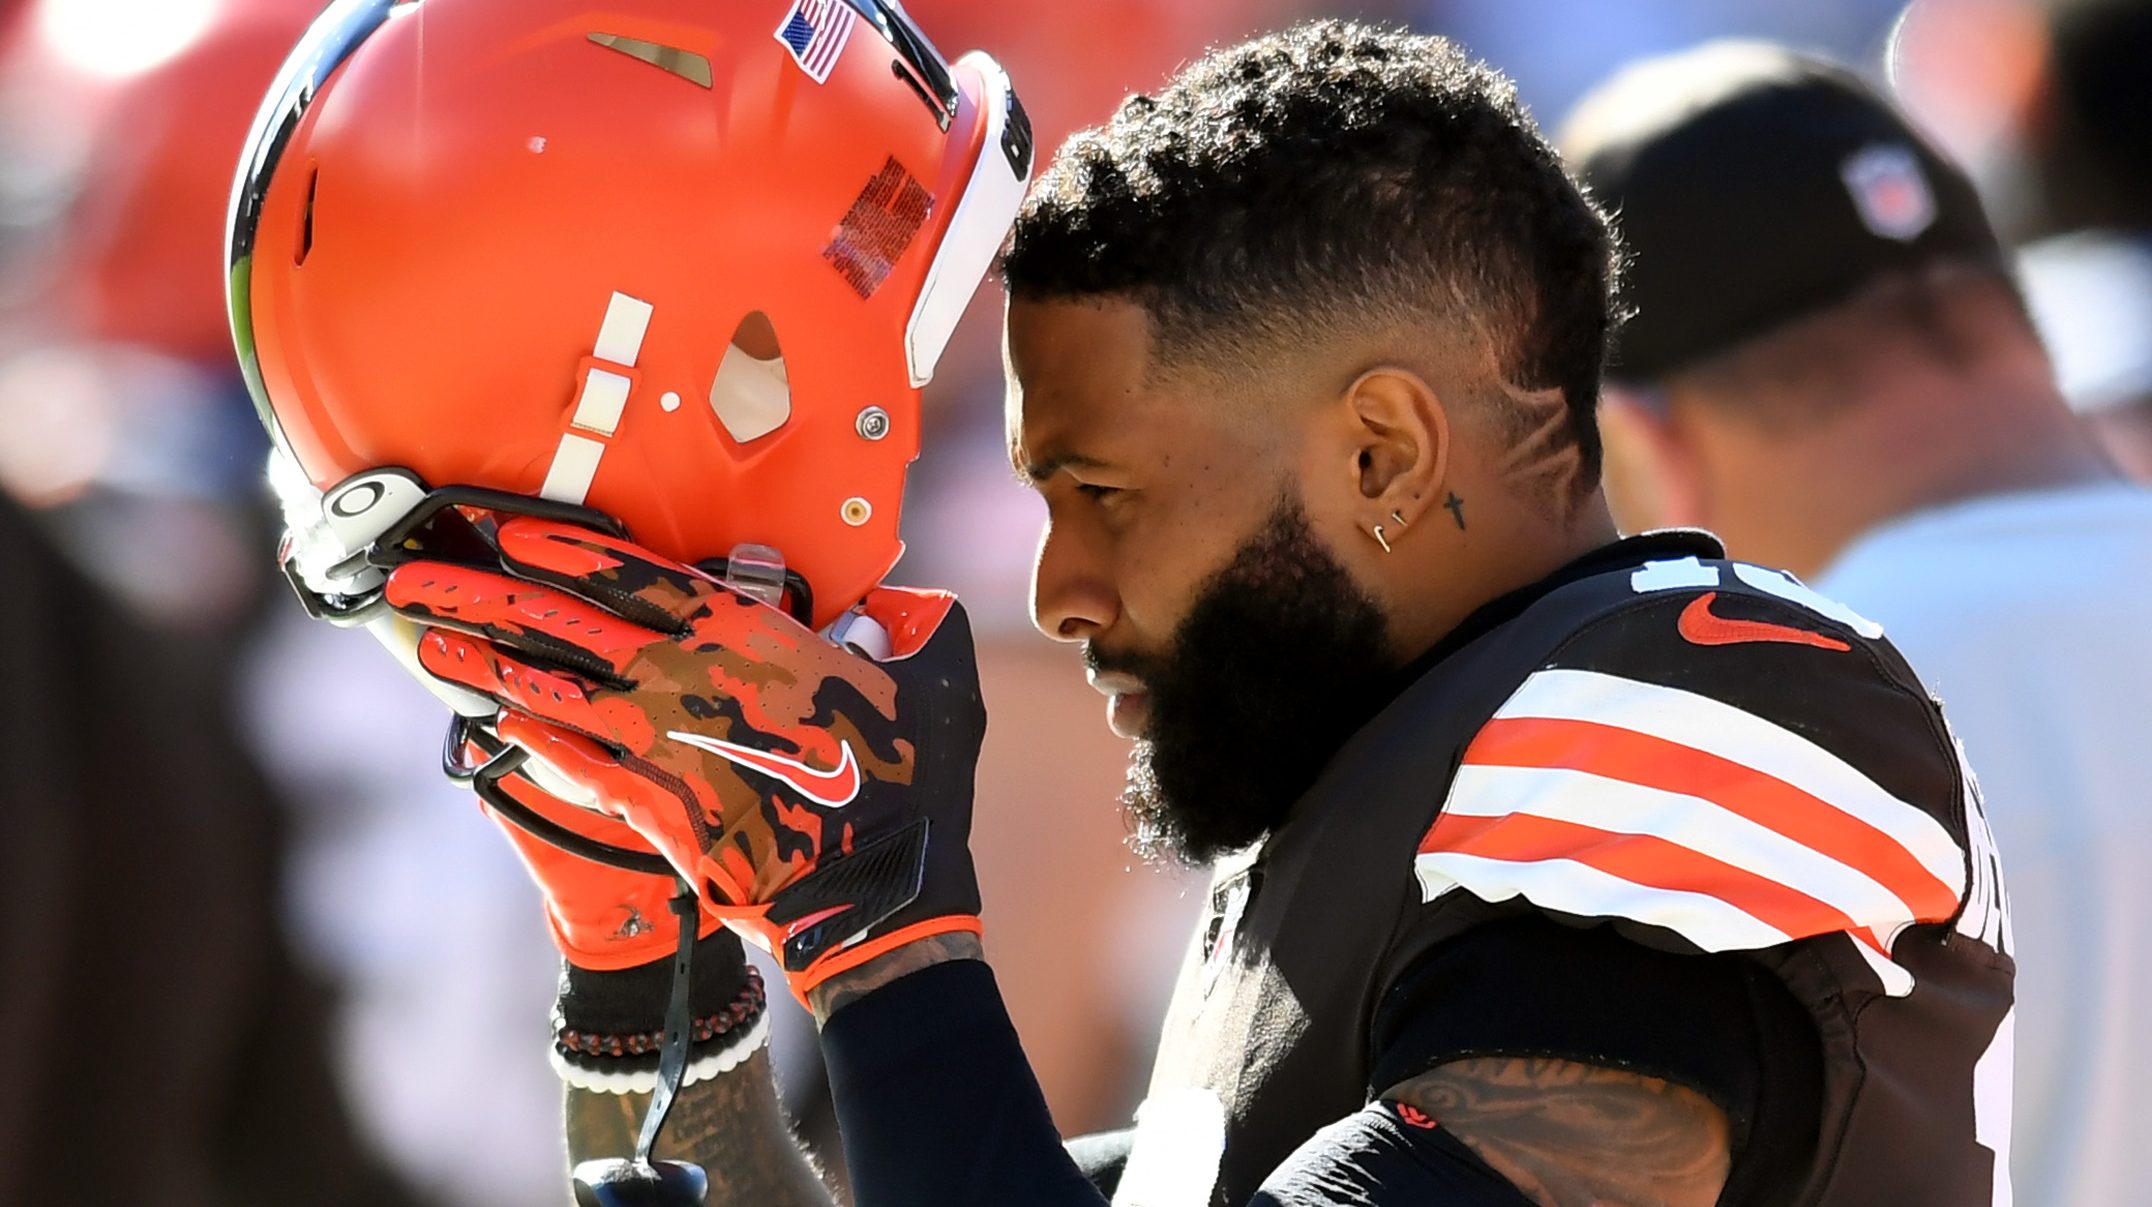 Odell Beckham Jr. is not the cure for all that ails 49ers